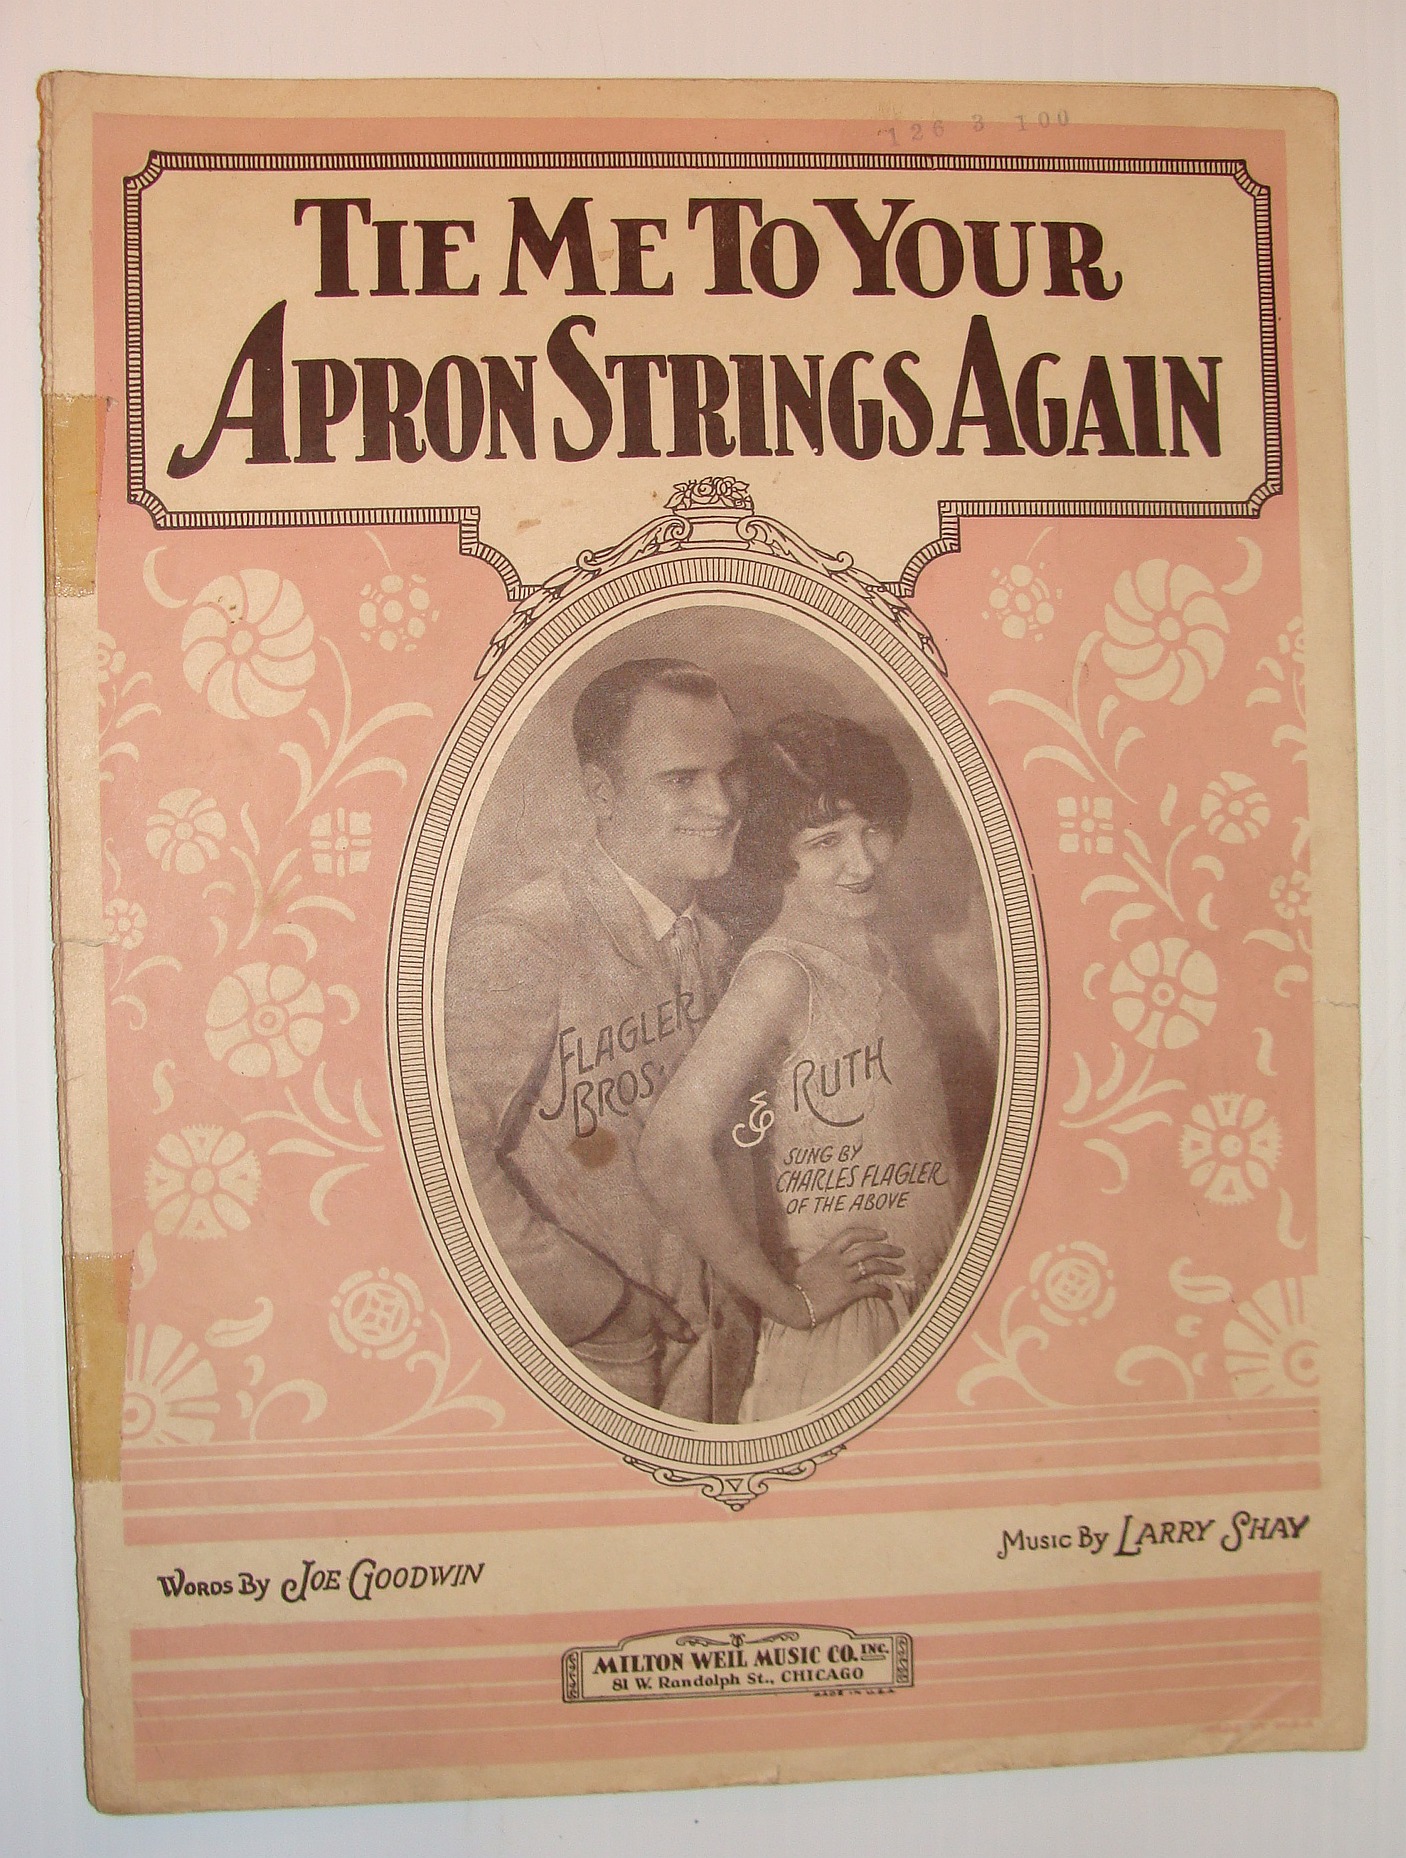 GOODWIN, JOE; SHAY, LARRY - Tie Me to Your Apron Strings Again: Sheet Music for Piano, Ukulele and Vocal